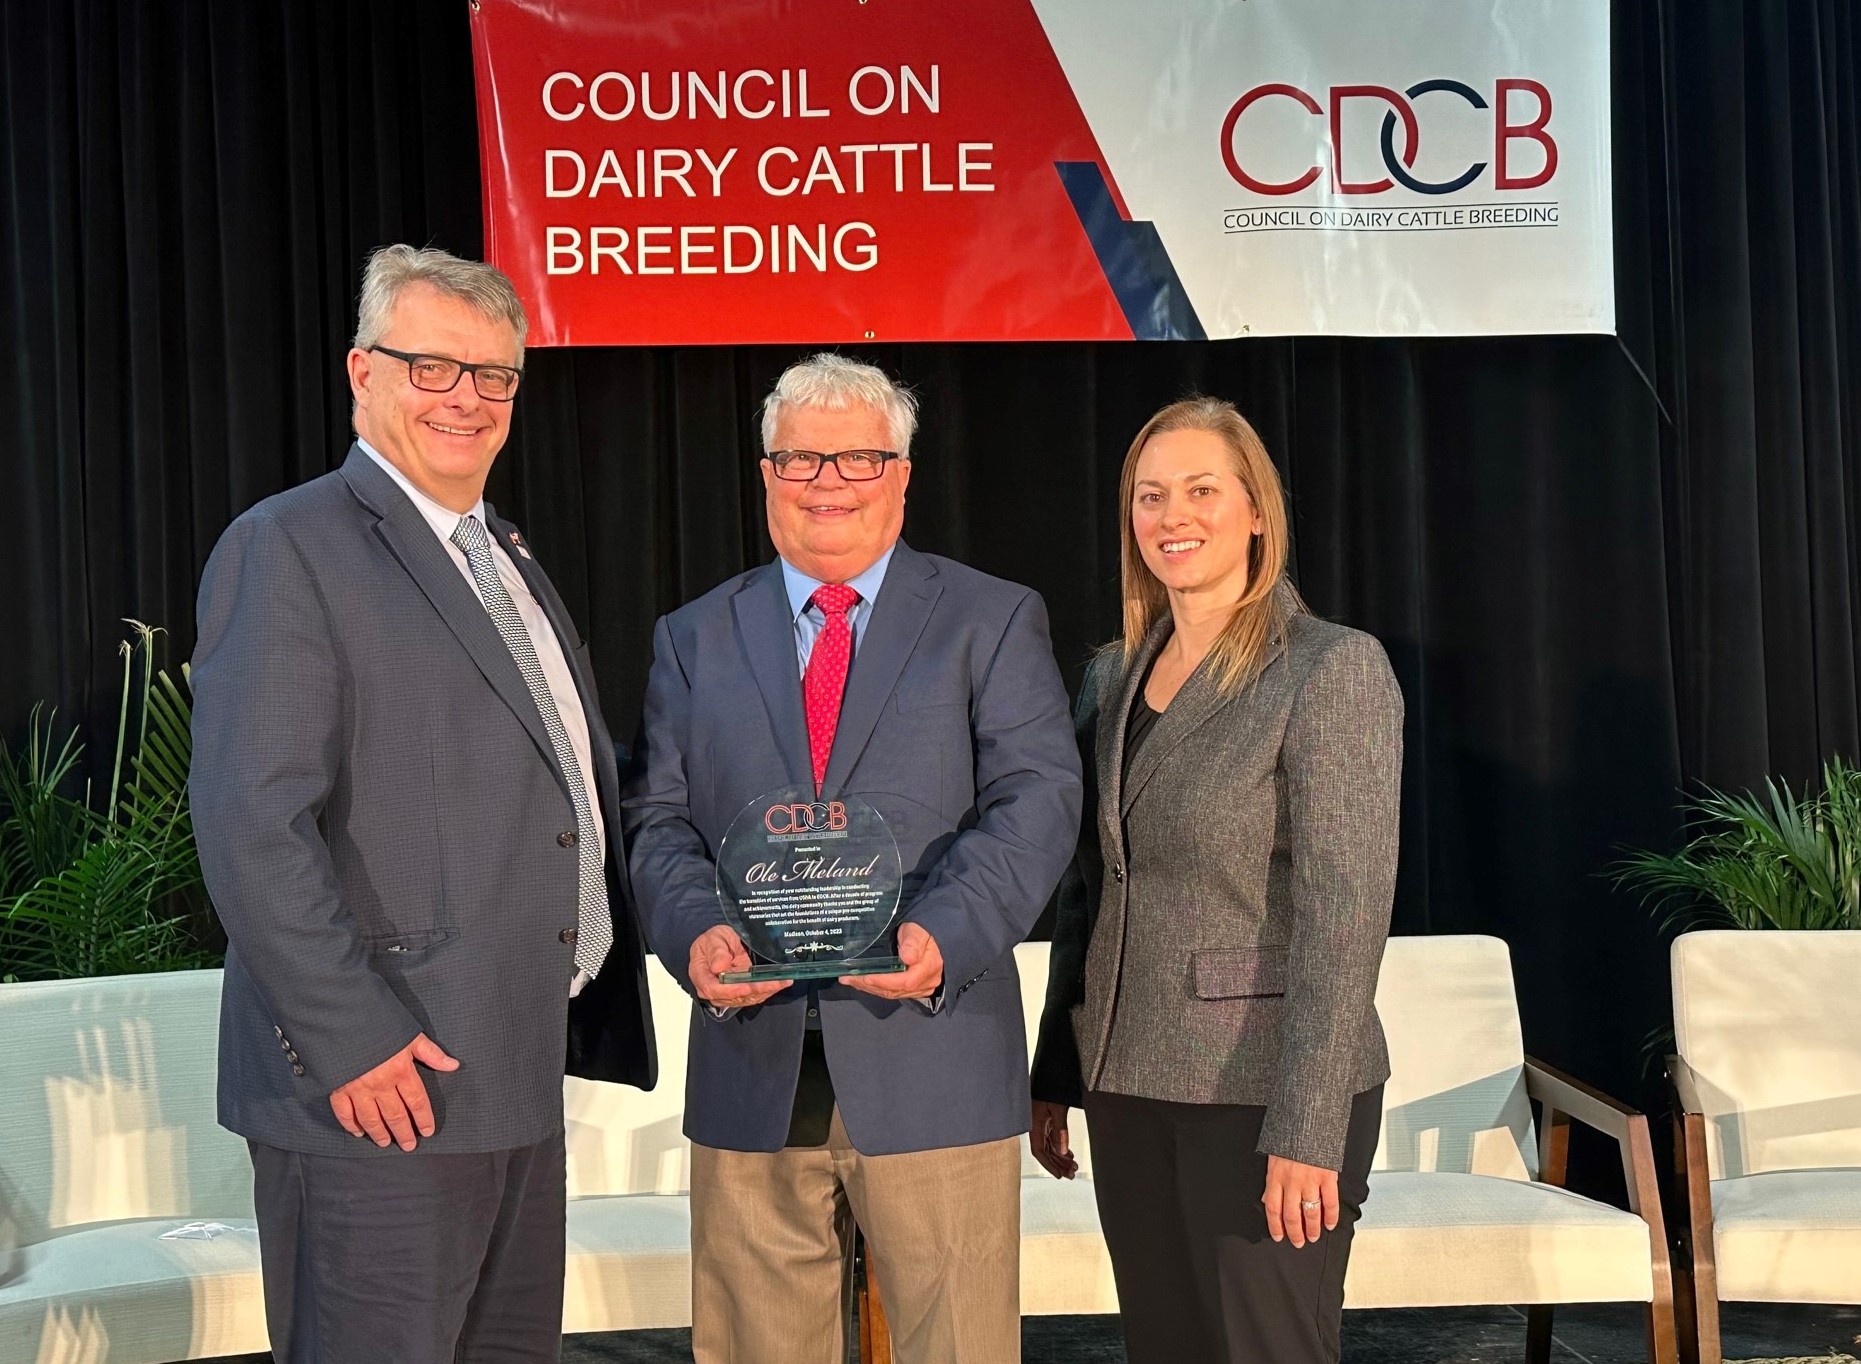 Ole Meland (middle) was CDCB Chair in 2013-14, when more than 75 individuals from A.I. organizations, milk recording, dairy records processing and breed associations collaborated through the CDCB Board and various committees and working groups to provide direction and functional support as the genetic services transitioned from USDA to CDCB.